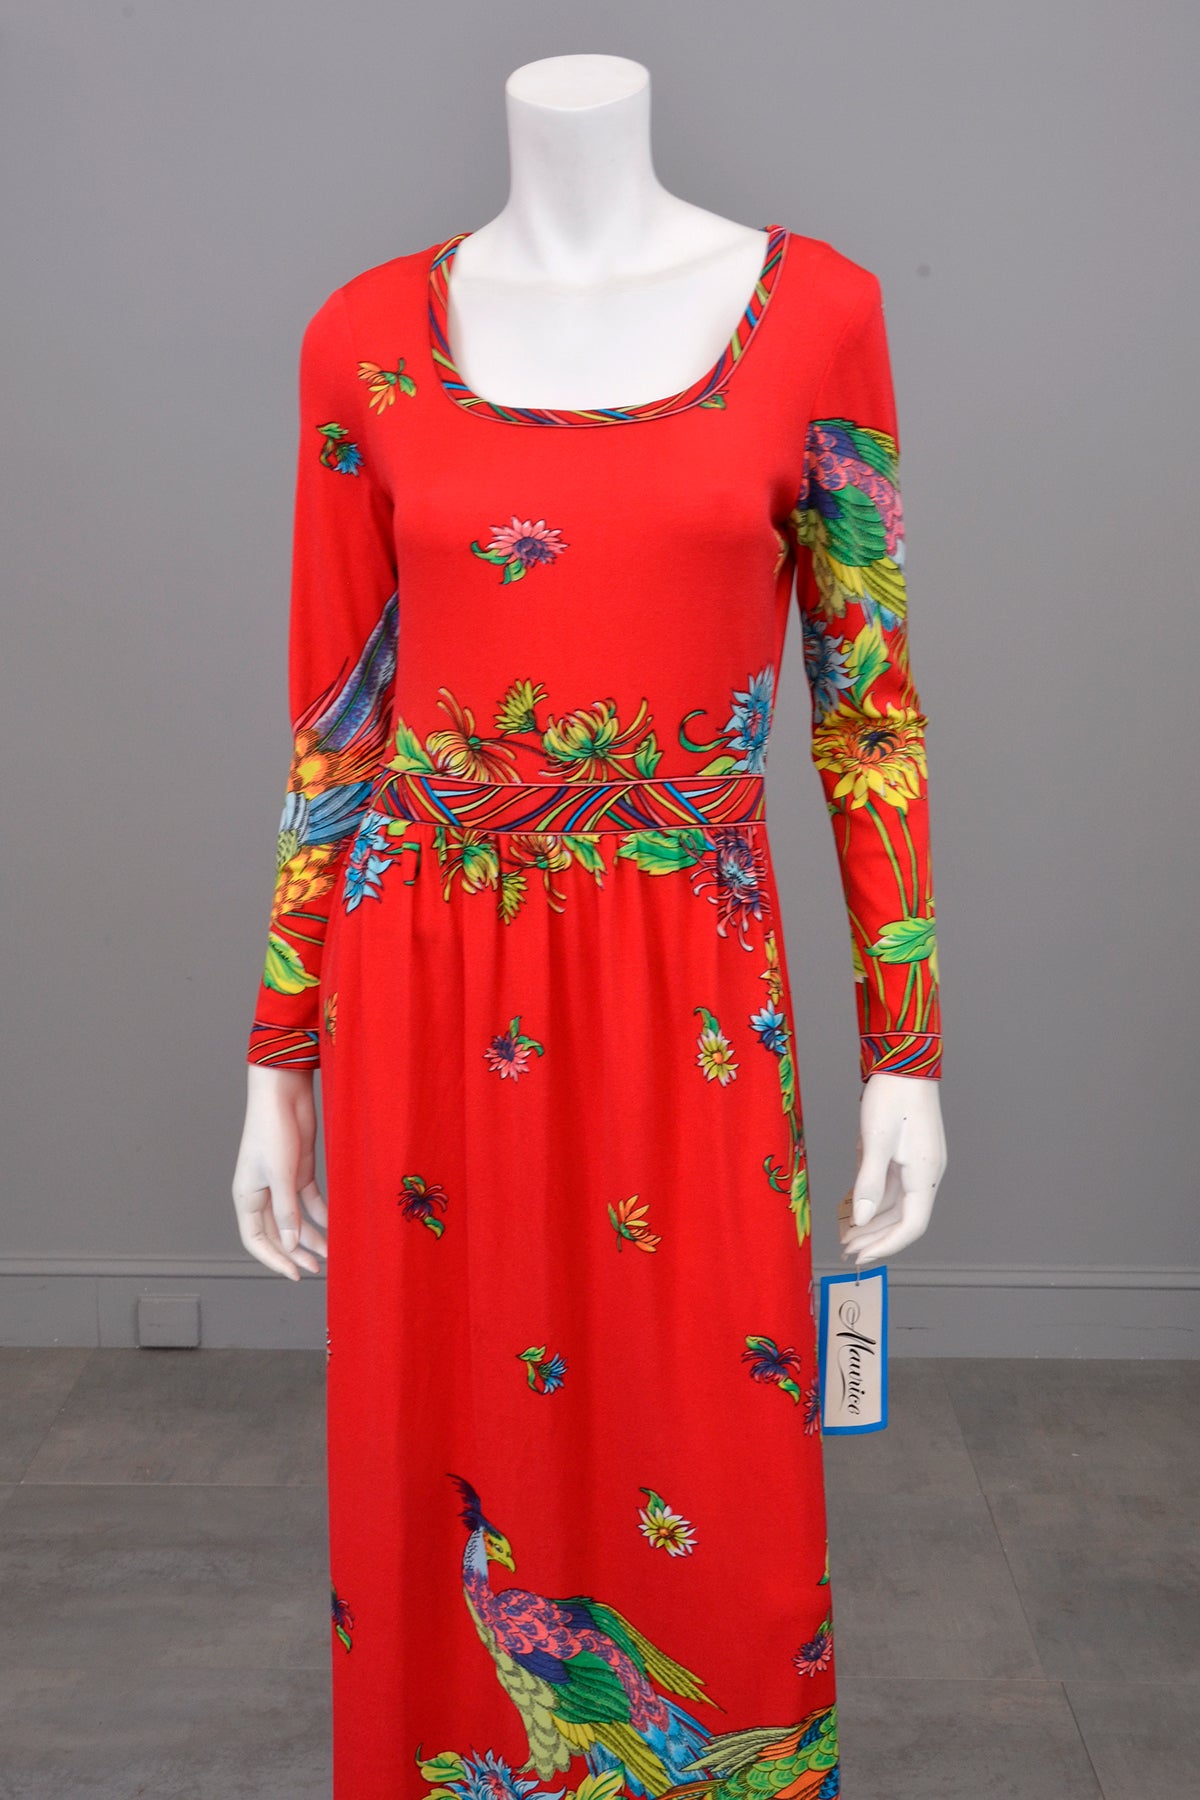 Vintage Peacock Print Jersey Knit Dress by Maurice